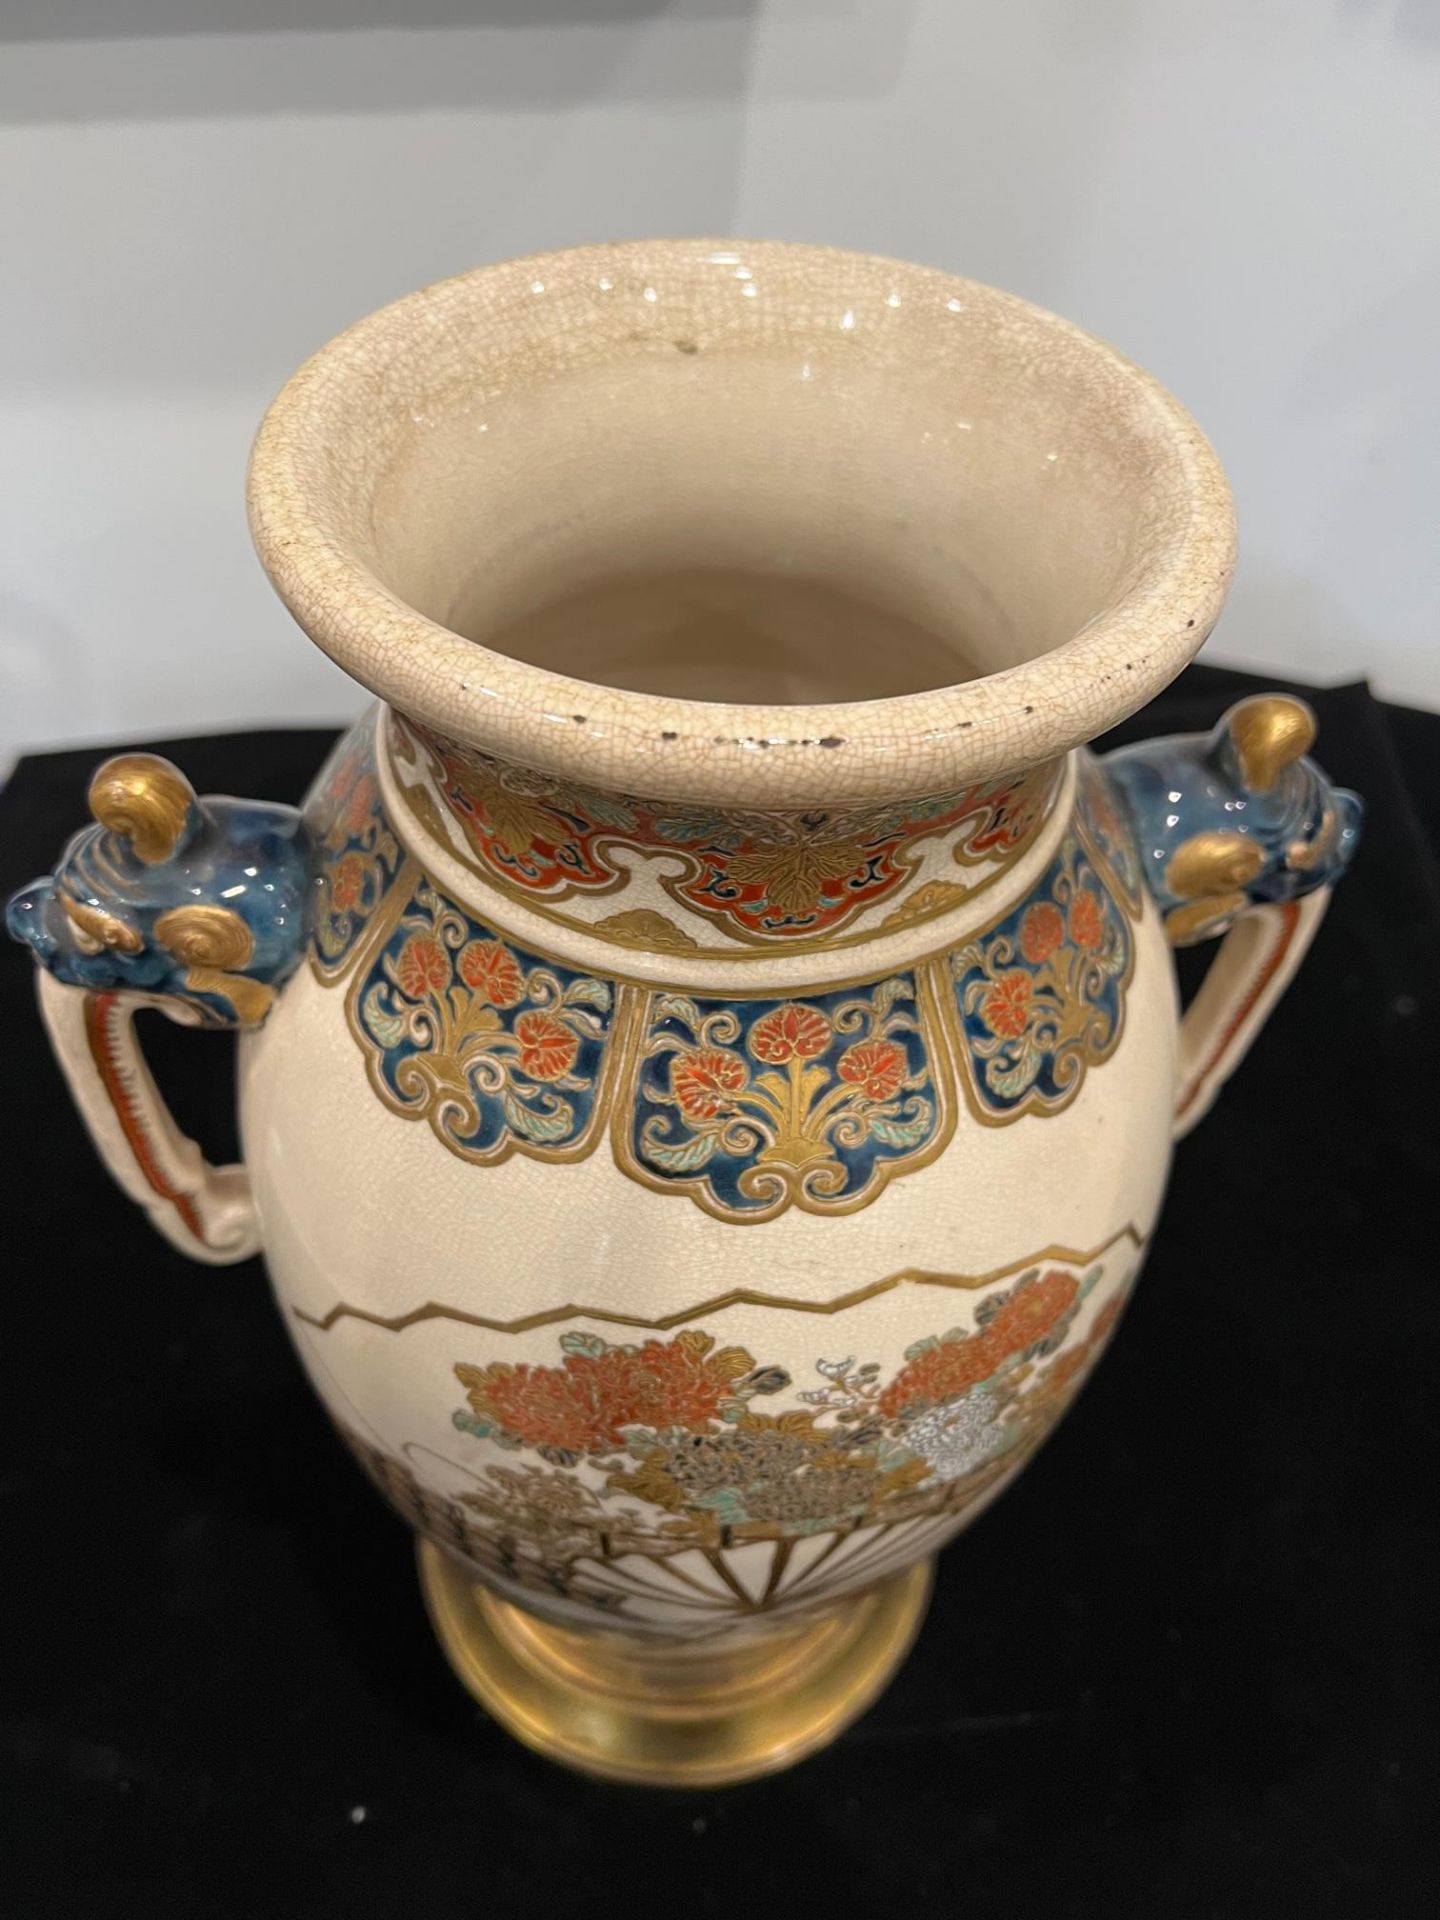 A JAPANESE IMPERIAL PERIOD SATSUMA VASE - Image 9 of 13